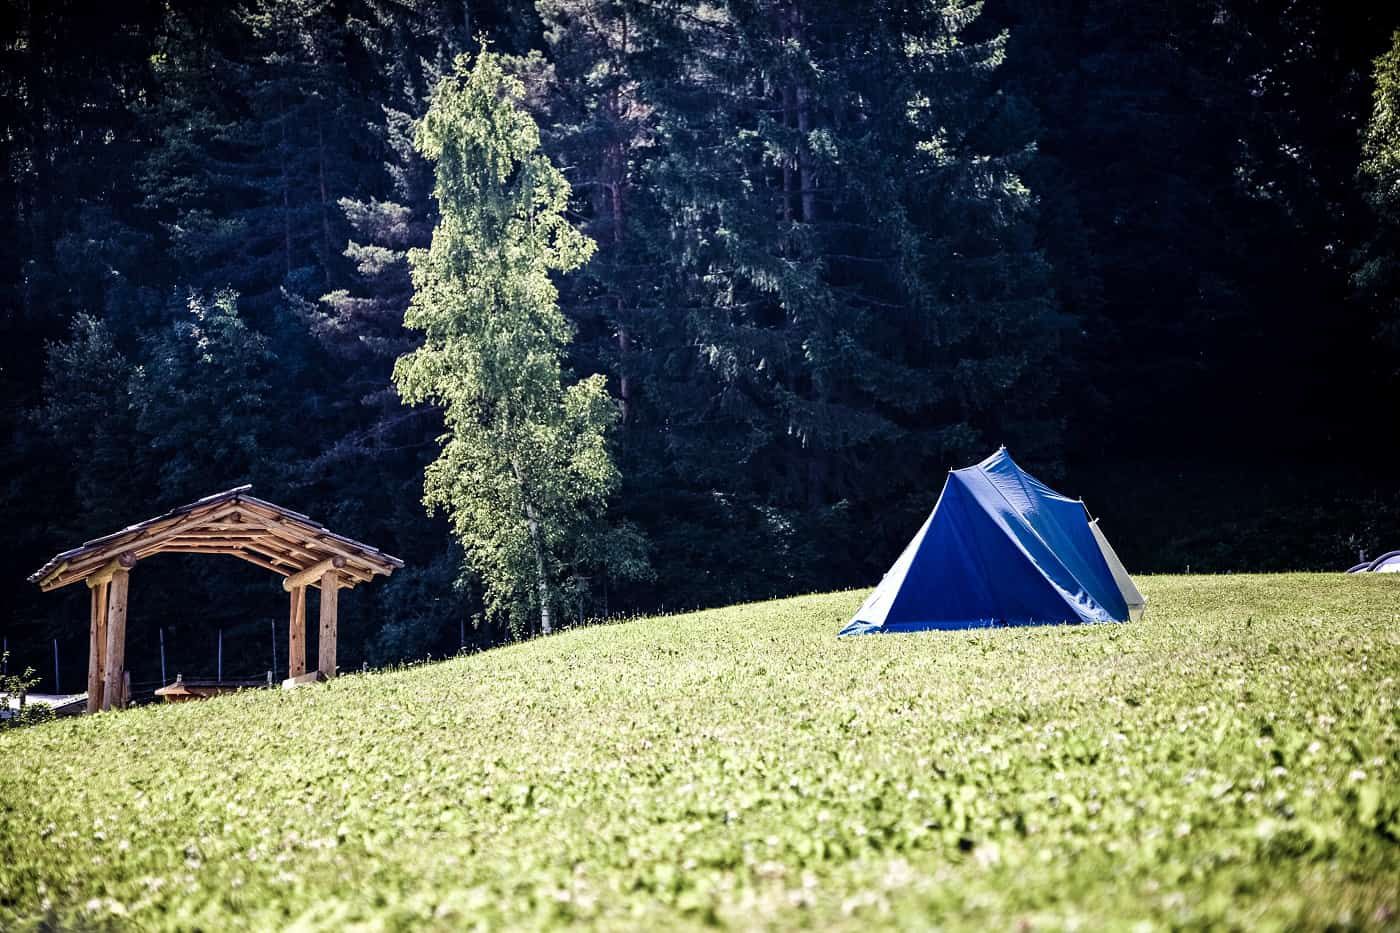 THE SILENCE OF GOING SOLO: Confronting fear while camping alone for 36 hours